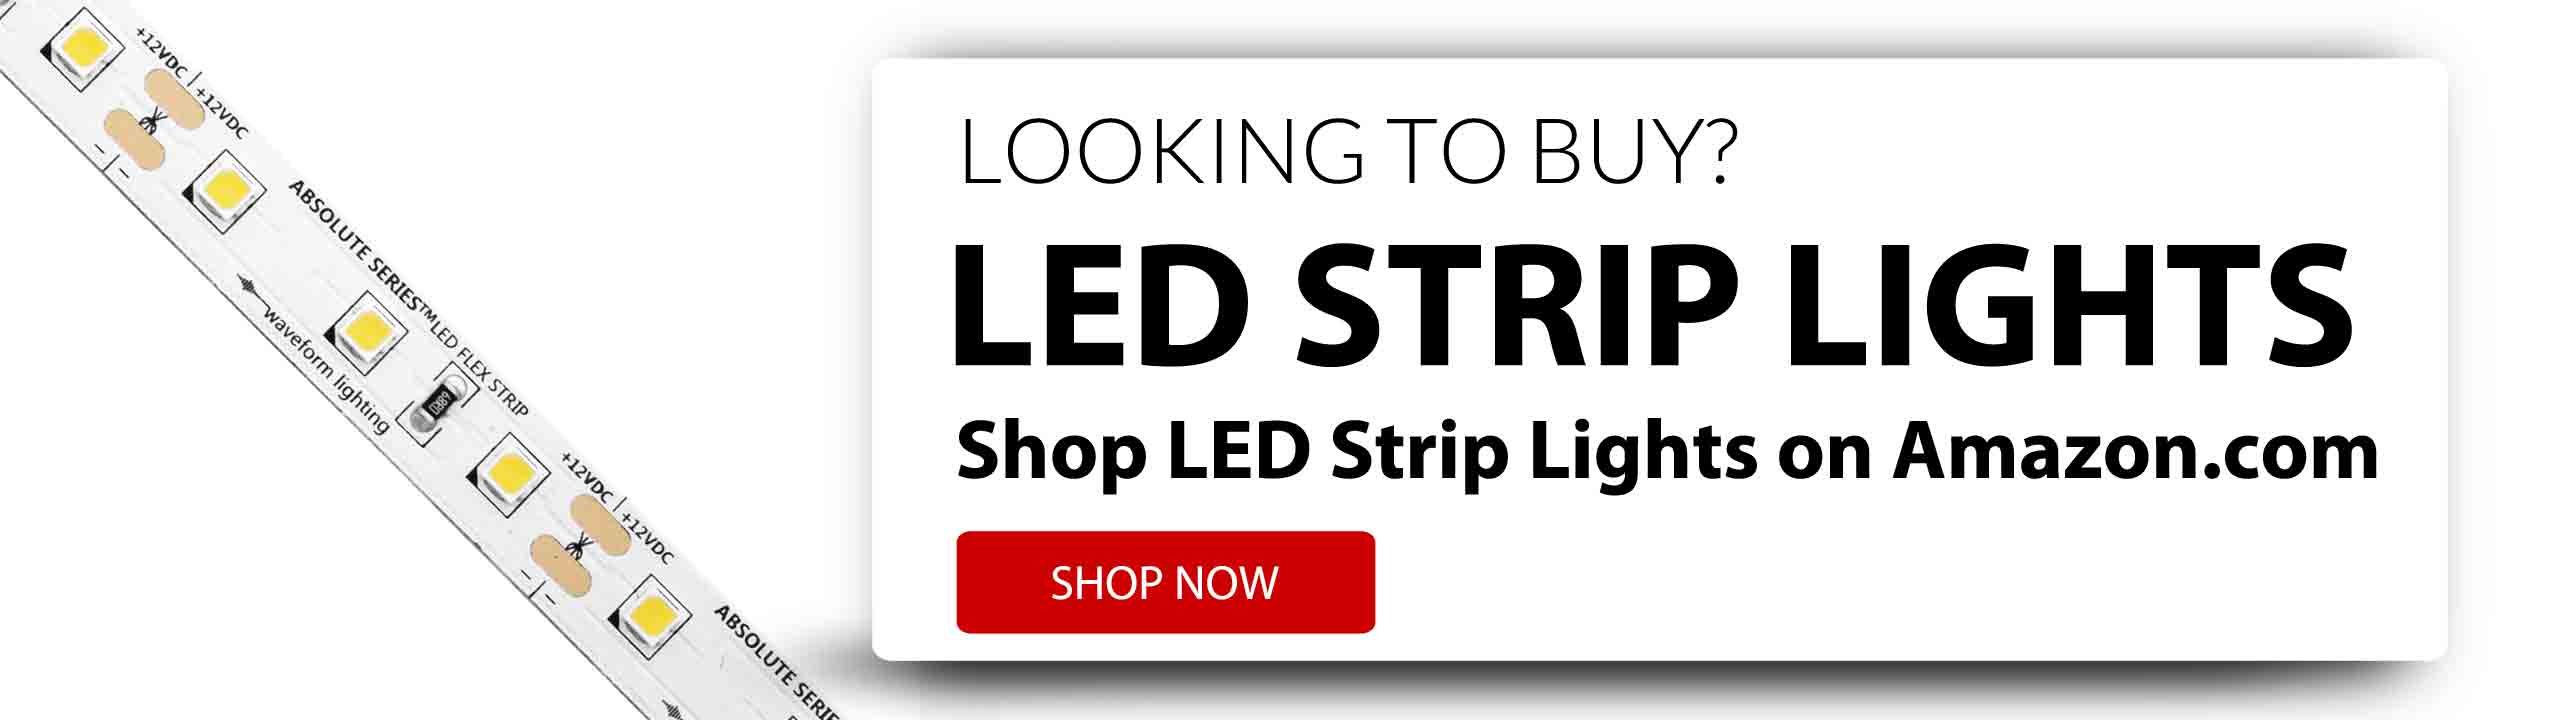 How To Connect Multiple Led Strip Lights? - Darkless LED Lighting Supplier